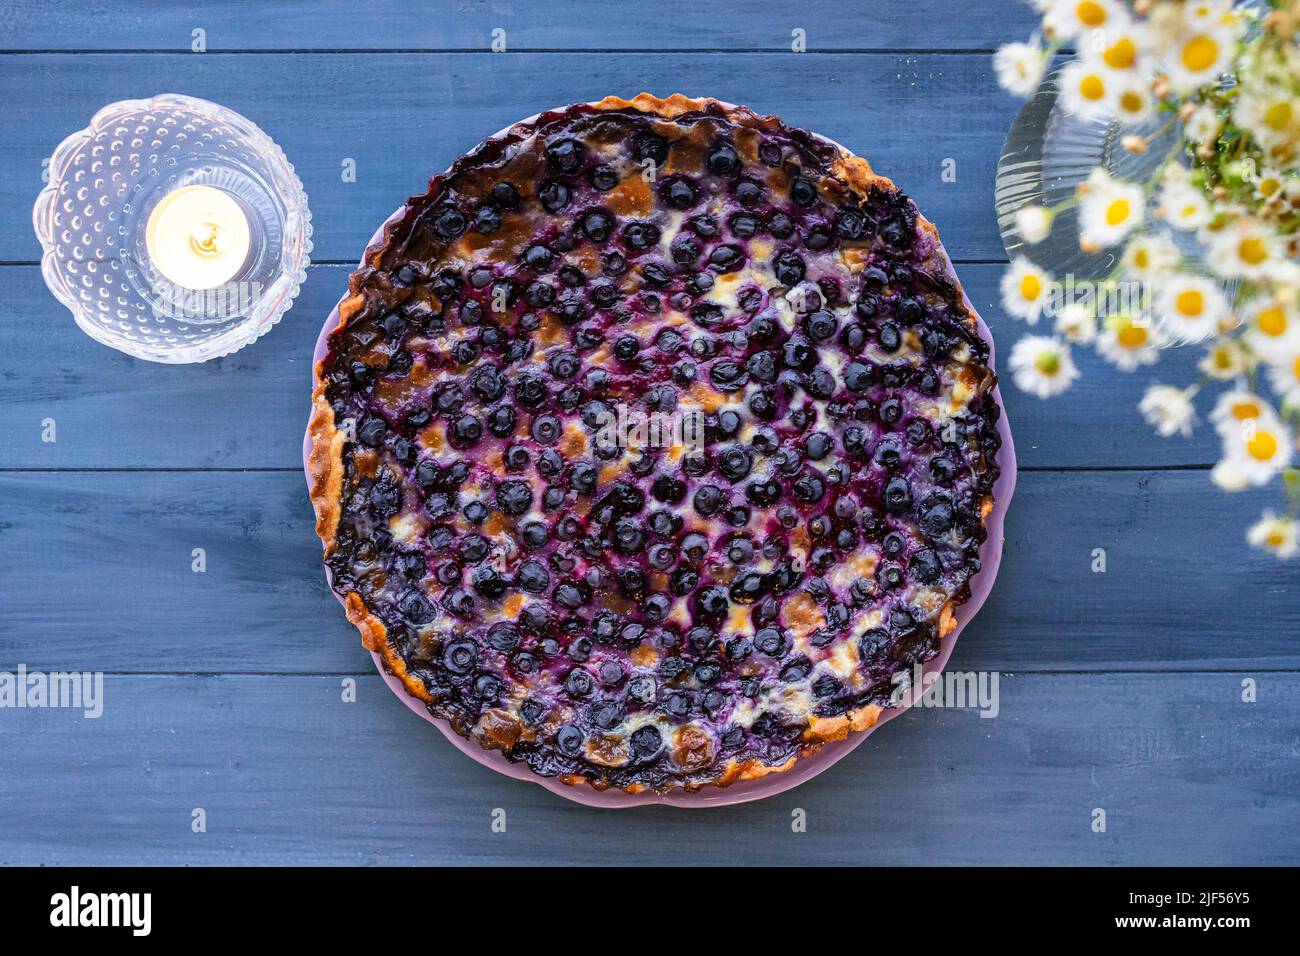 Mustikkapiirakka, a Finnish Blueberry Pie. Flat lay, top view shot on blue wooden table with white flowers. Stock Photo